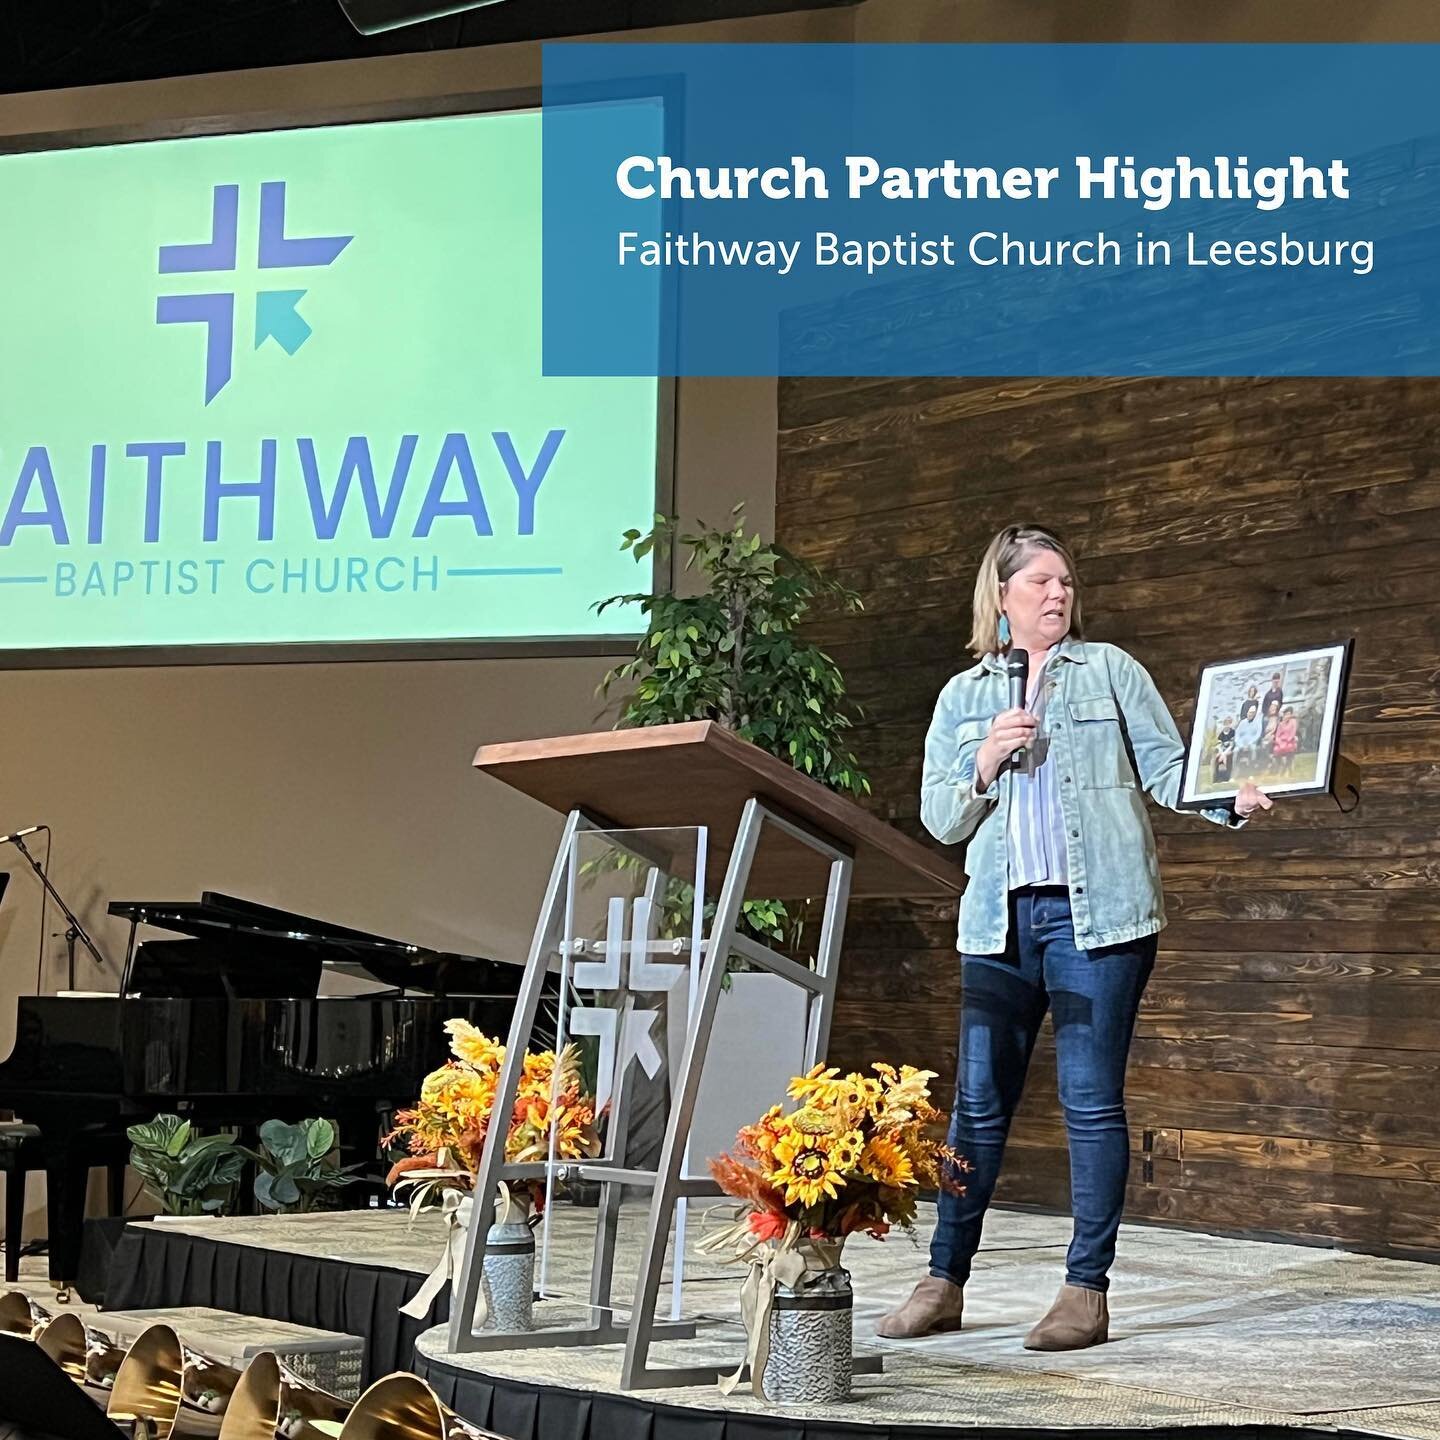 🎉Church Partner Highlight: Faithway Baptist Church in Leesburg @faithwaybaptist 

Taking a moment to recognize and thank Faithway Baptist Church for inviting our staff to share our mission with your church family last weekend! 

Not only is Faithway